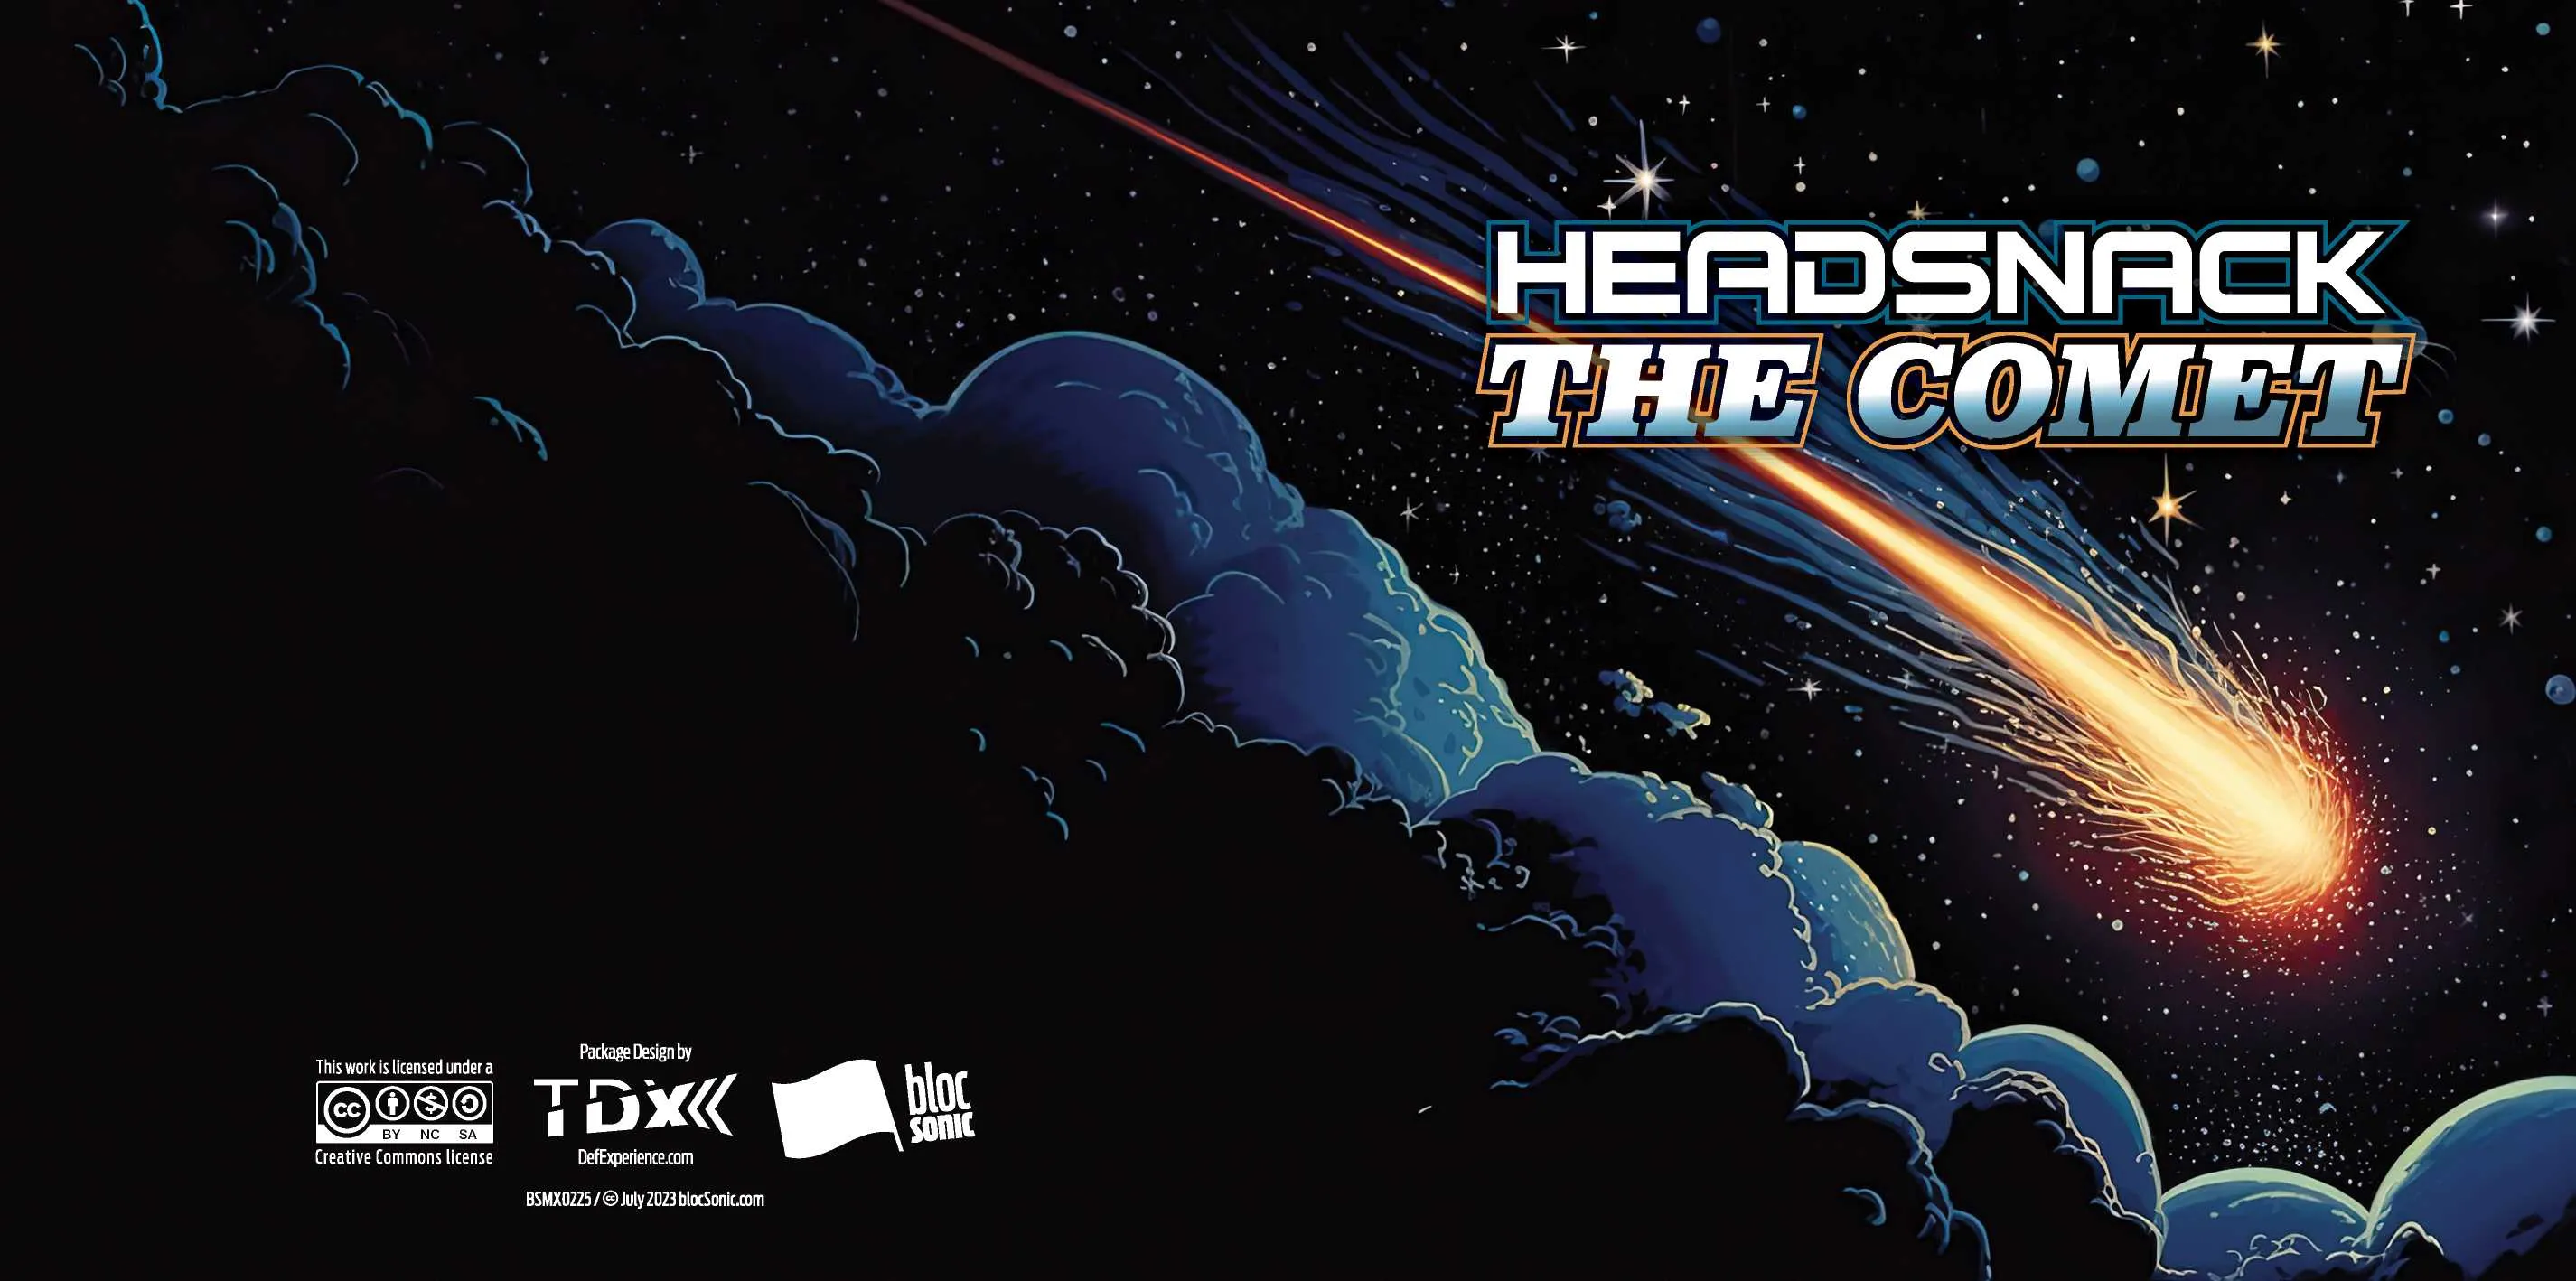 Album insert for “The Comet” by Headsnack